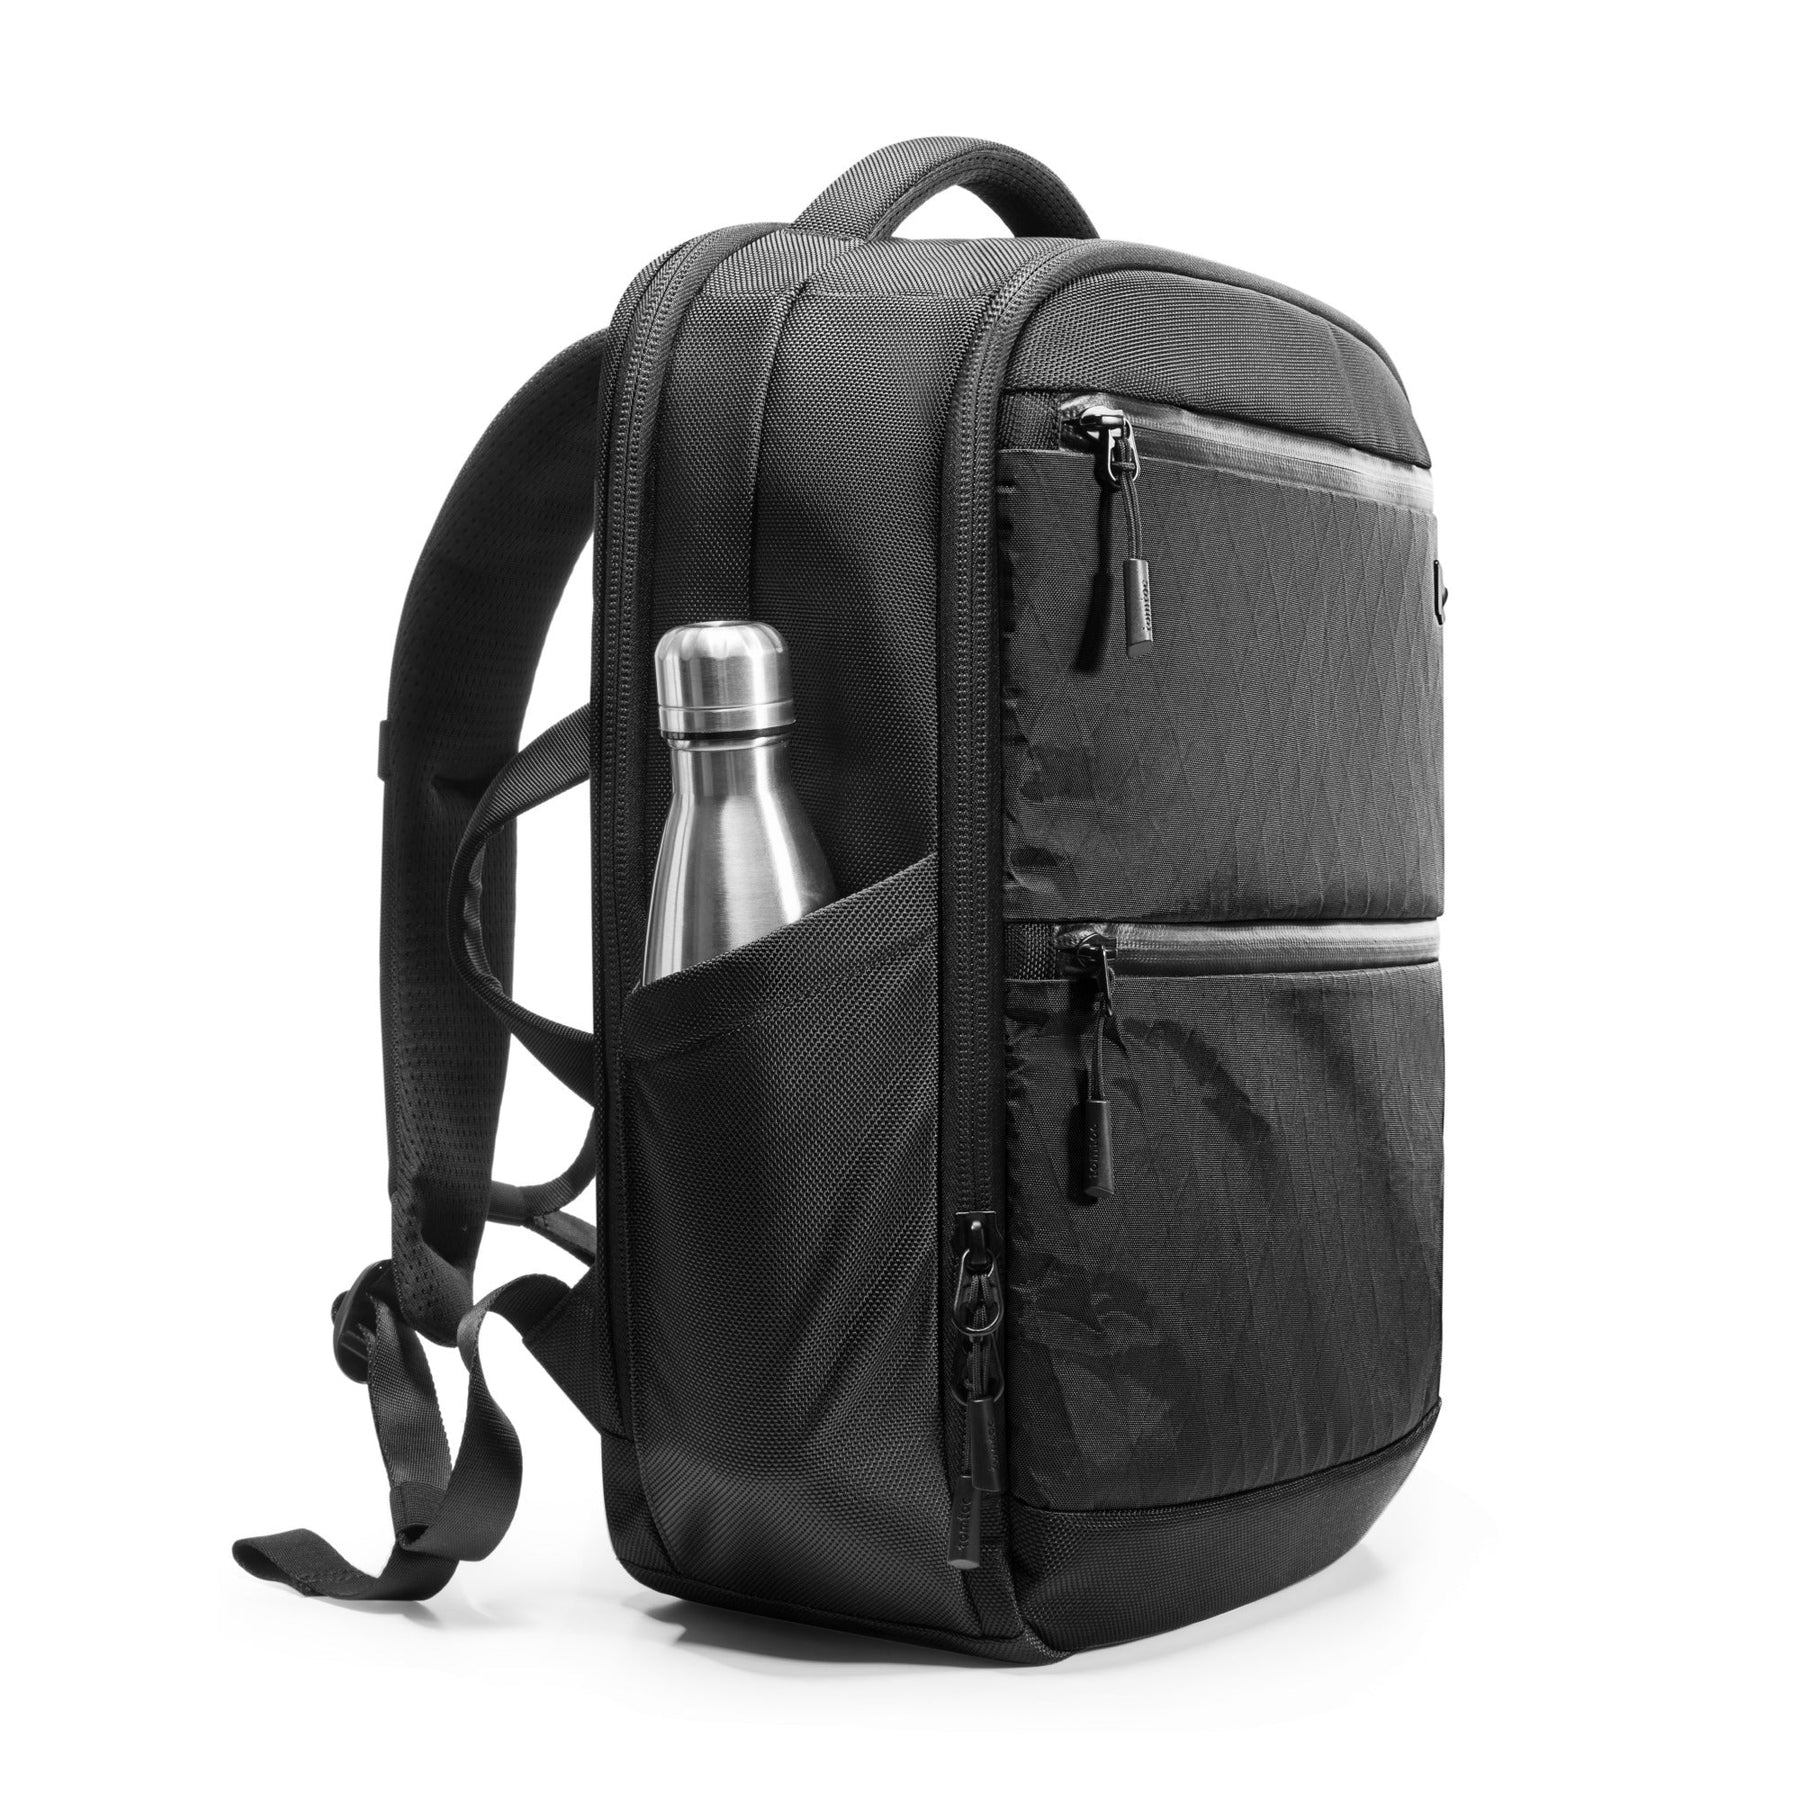 TechPack-T73 X-Pac Laptop Backpack 20L